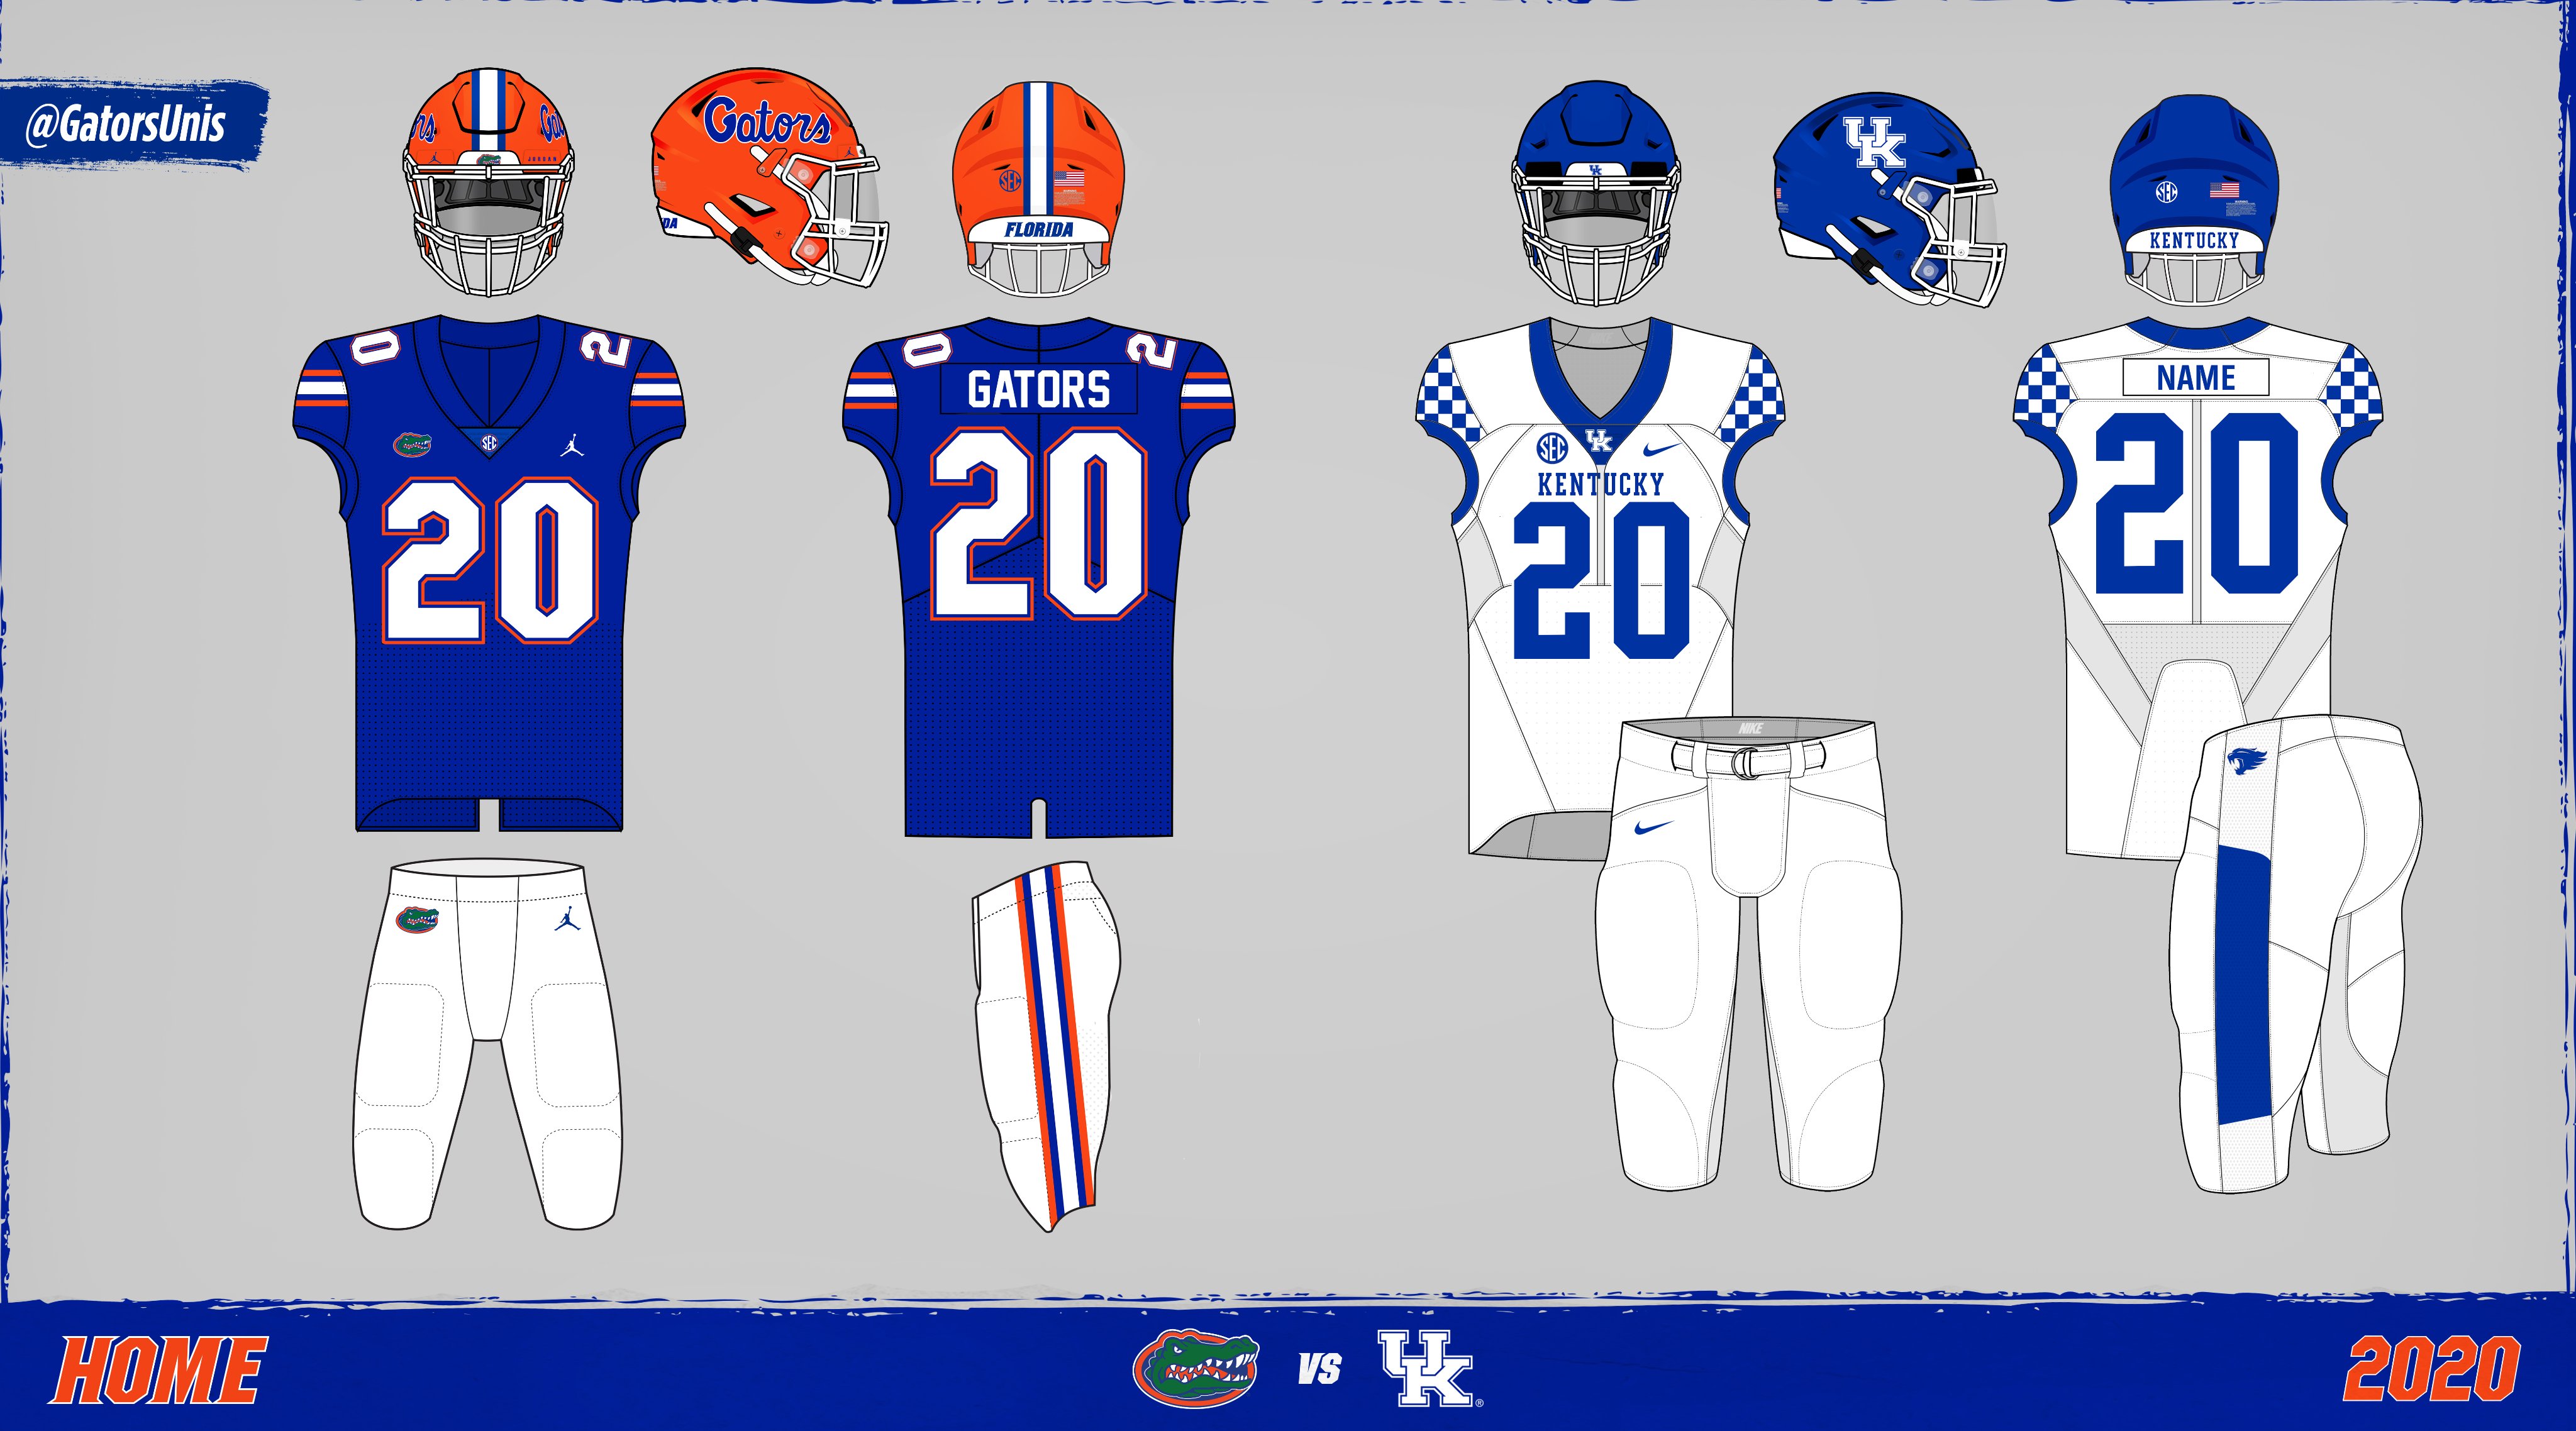 Gators Uniform Tracker on X: BREAKING: The #Gators have announced their  2023 uniform schedule 🐊 - Only orange (or black) helmets - Only 5 uniforms  all year - No orange jerseys or